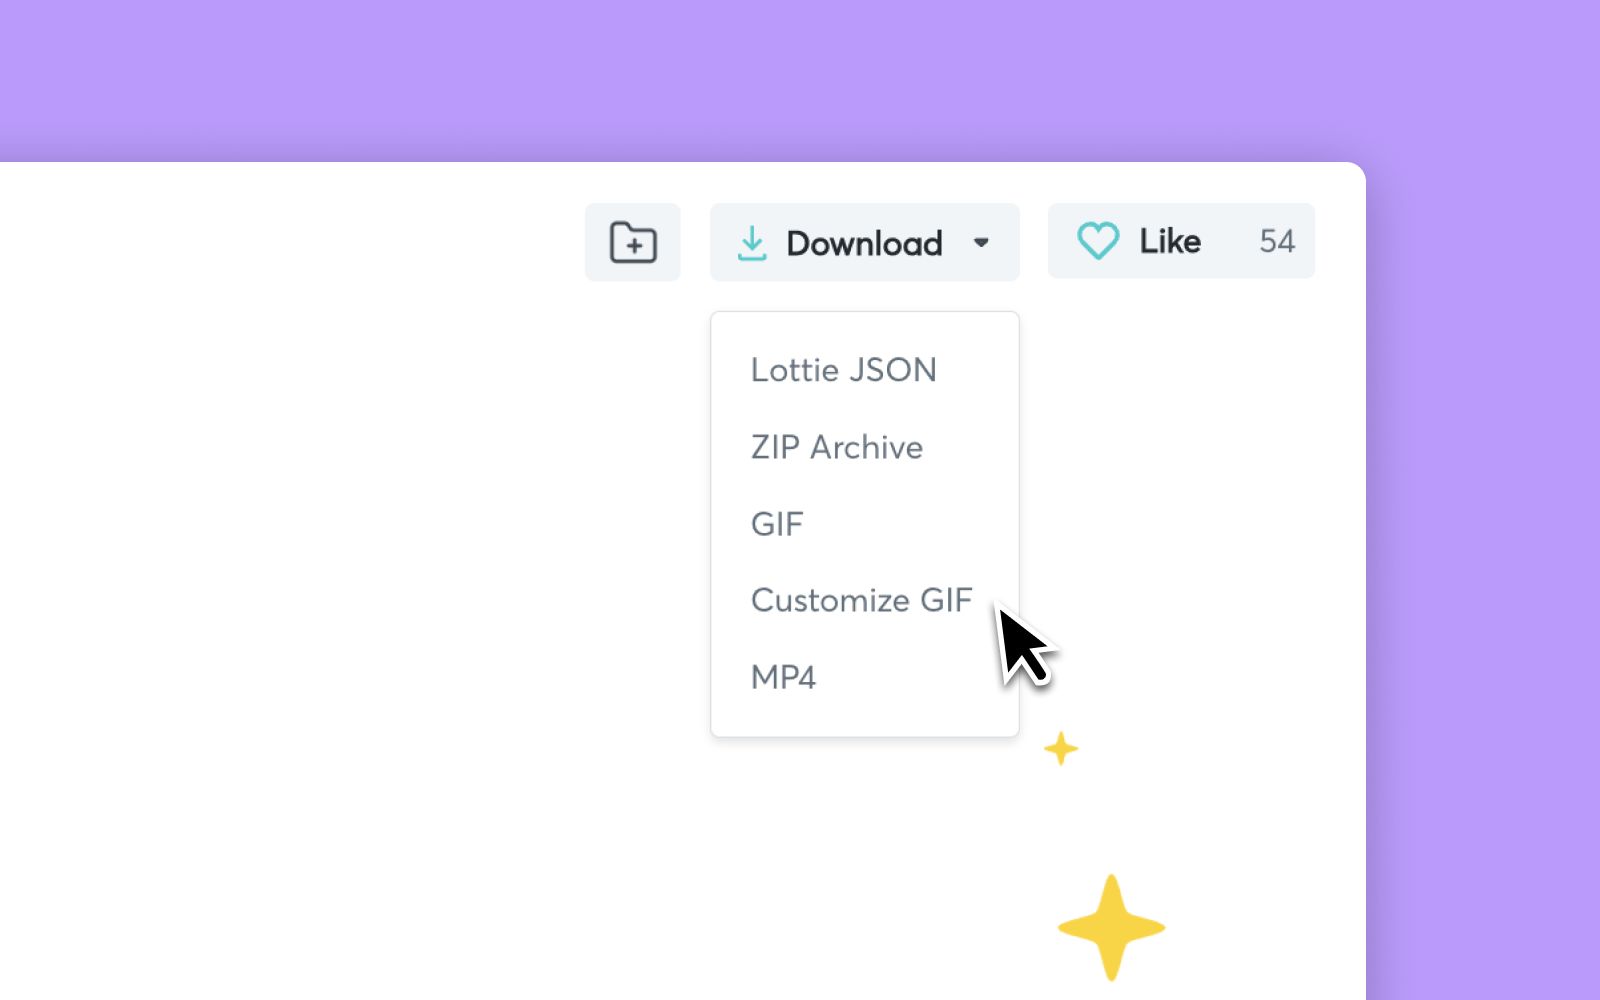 Click Download > Customize GIF